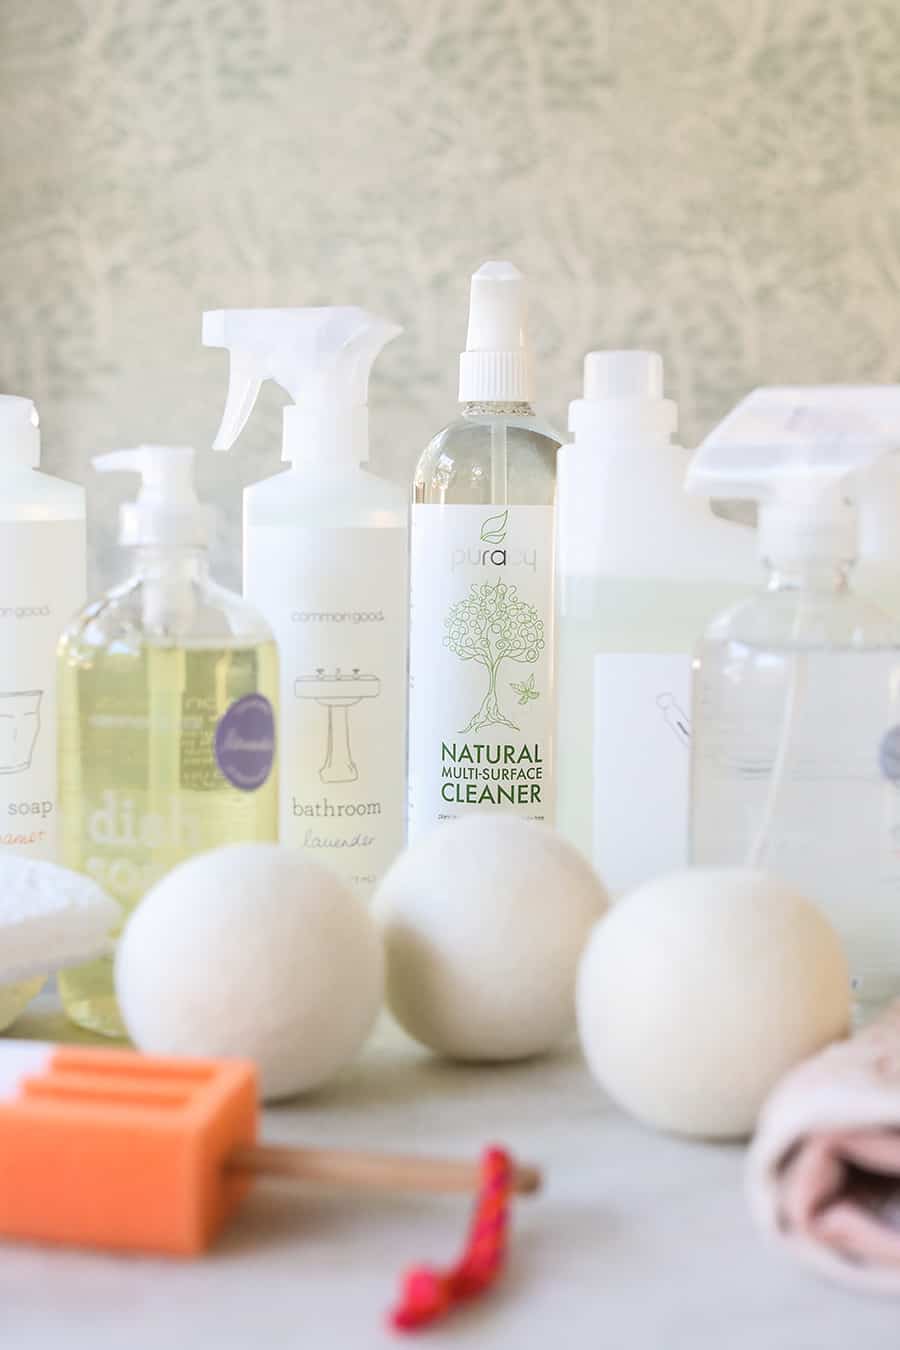 Eco friendly cleaning products and wool dryer balls